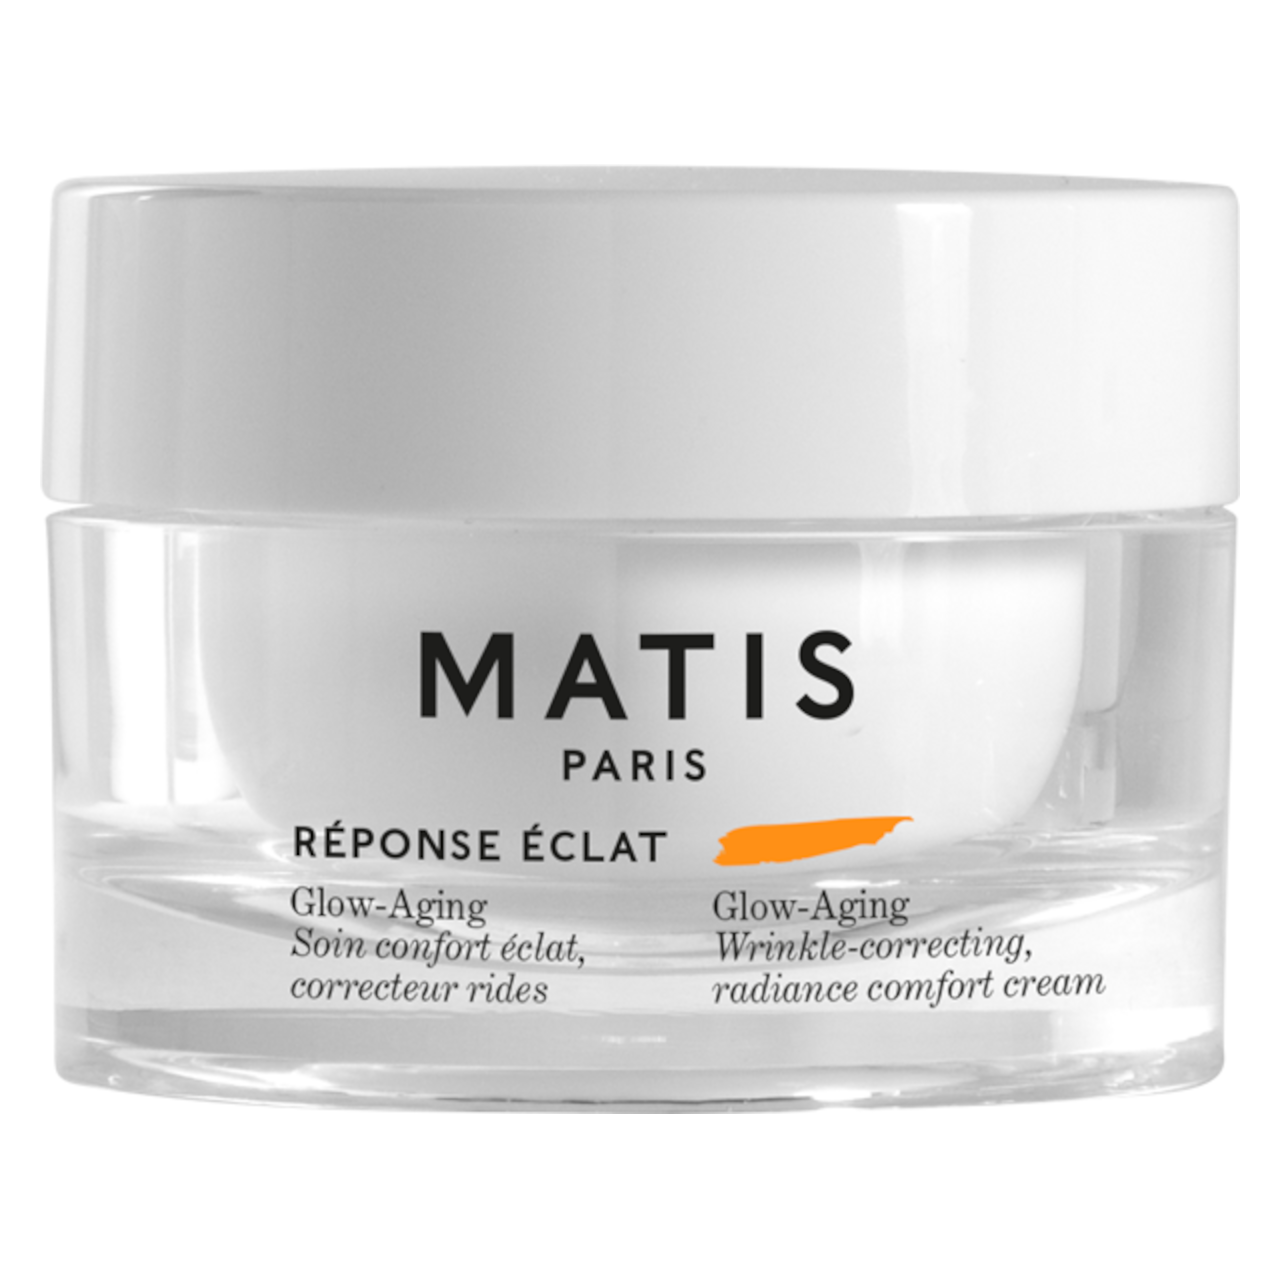 Matis Paris Reponse Eclat Glow-Aging Cream - 50 ml (A1110011) Questions & Answers